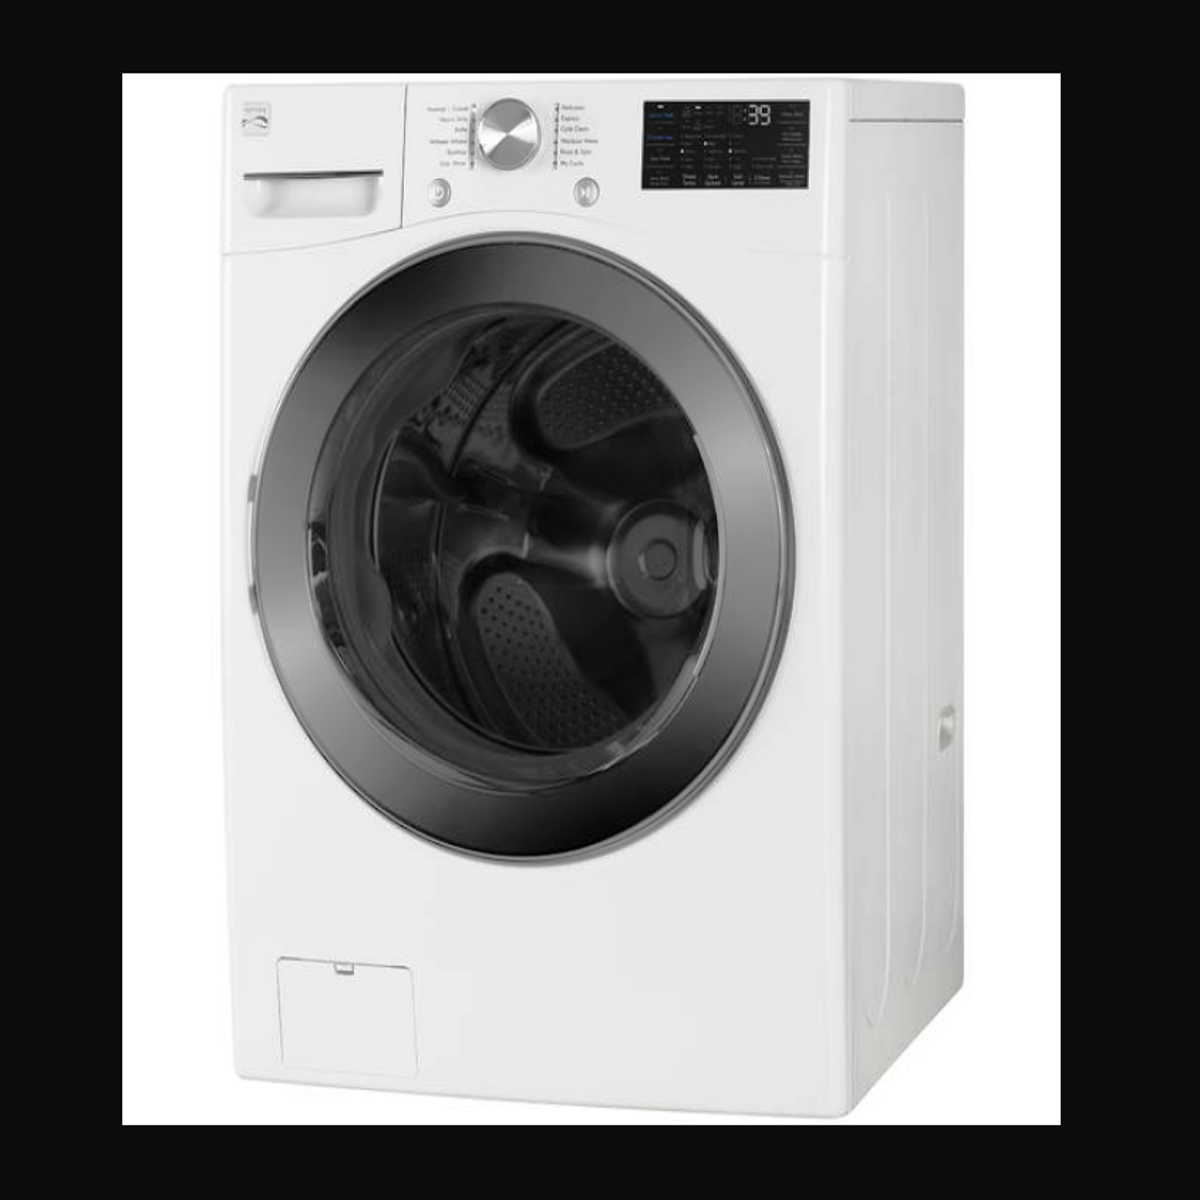 Kenmore front load washer not draining